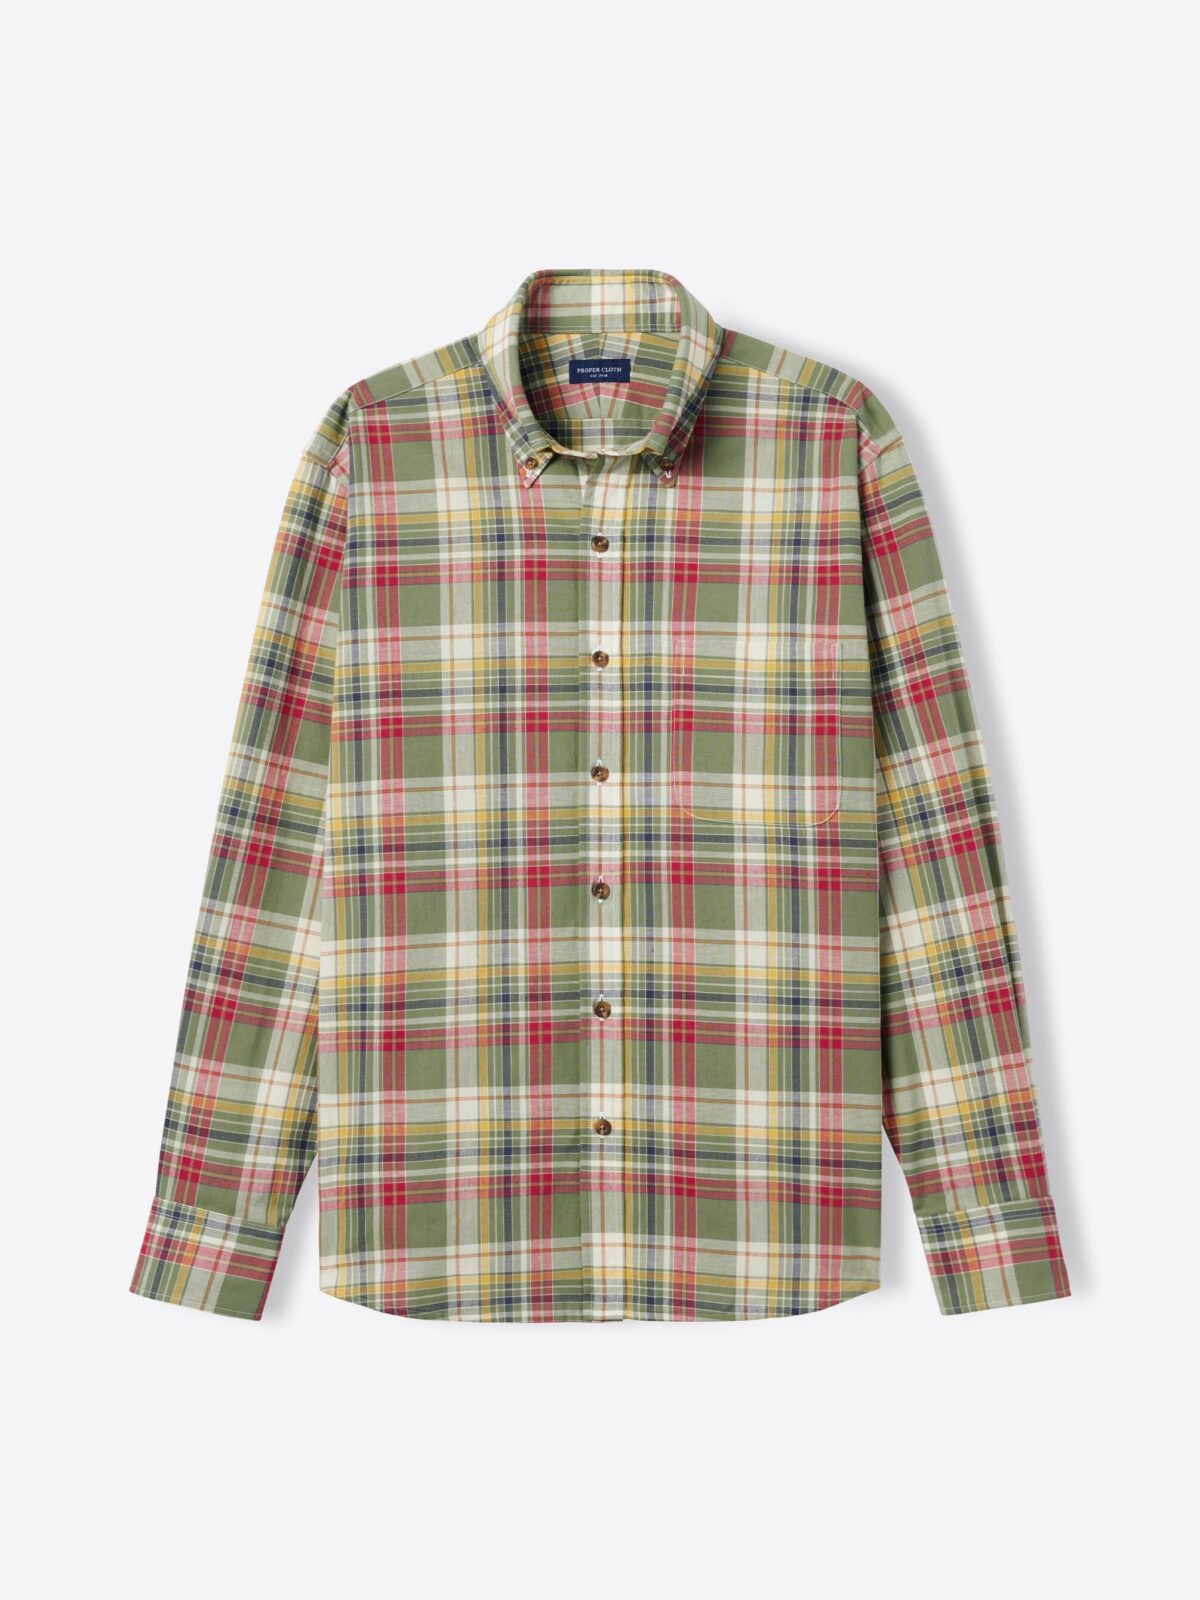 Olive and Red Indian Madras Shirt by Proper Cloth